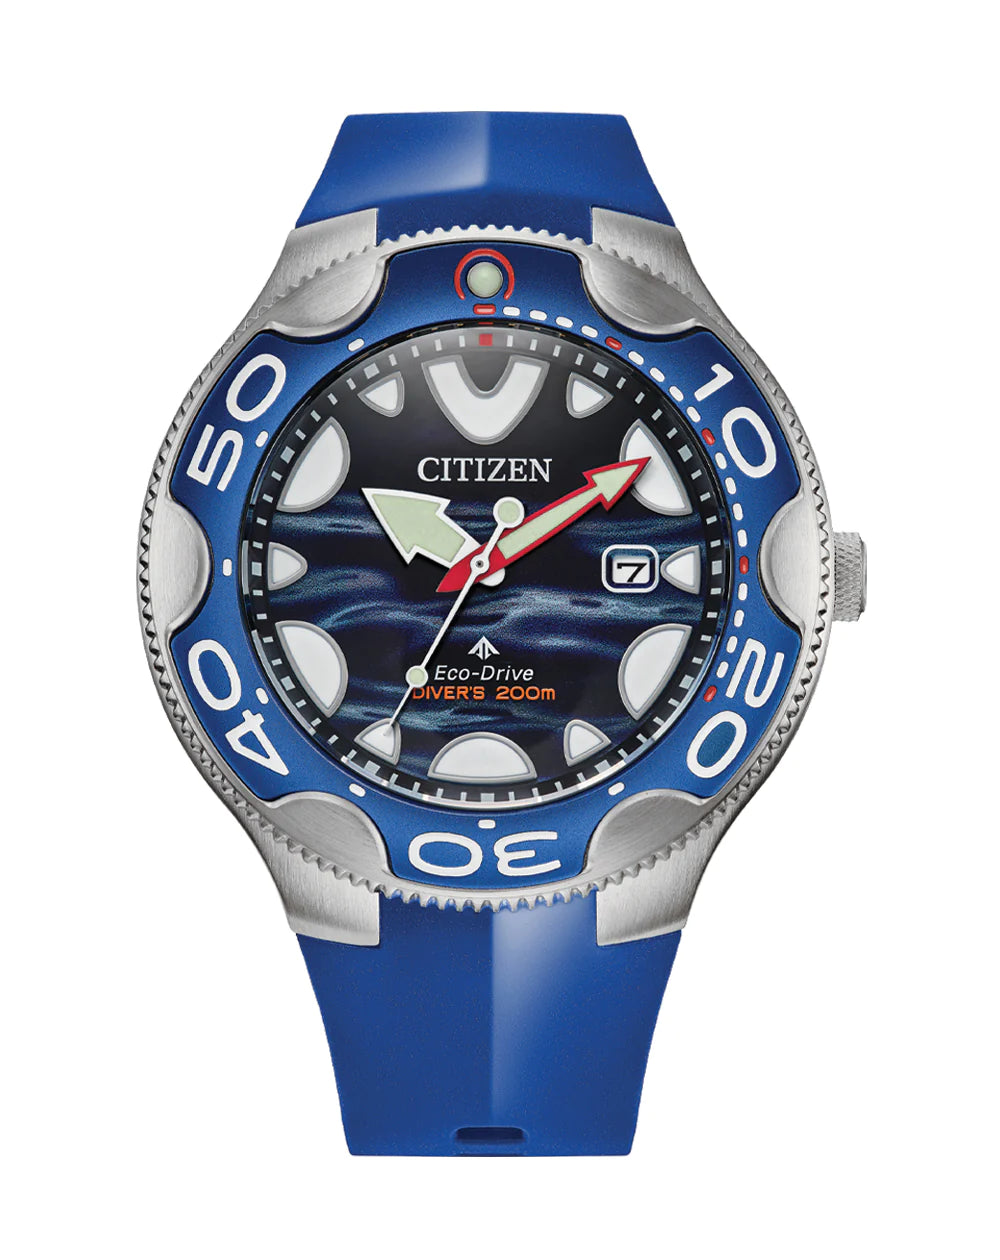 Citizen Eco-Drive Gents Promaster Watch #24068